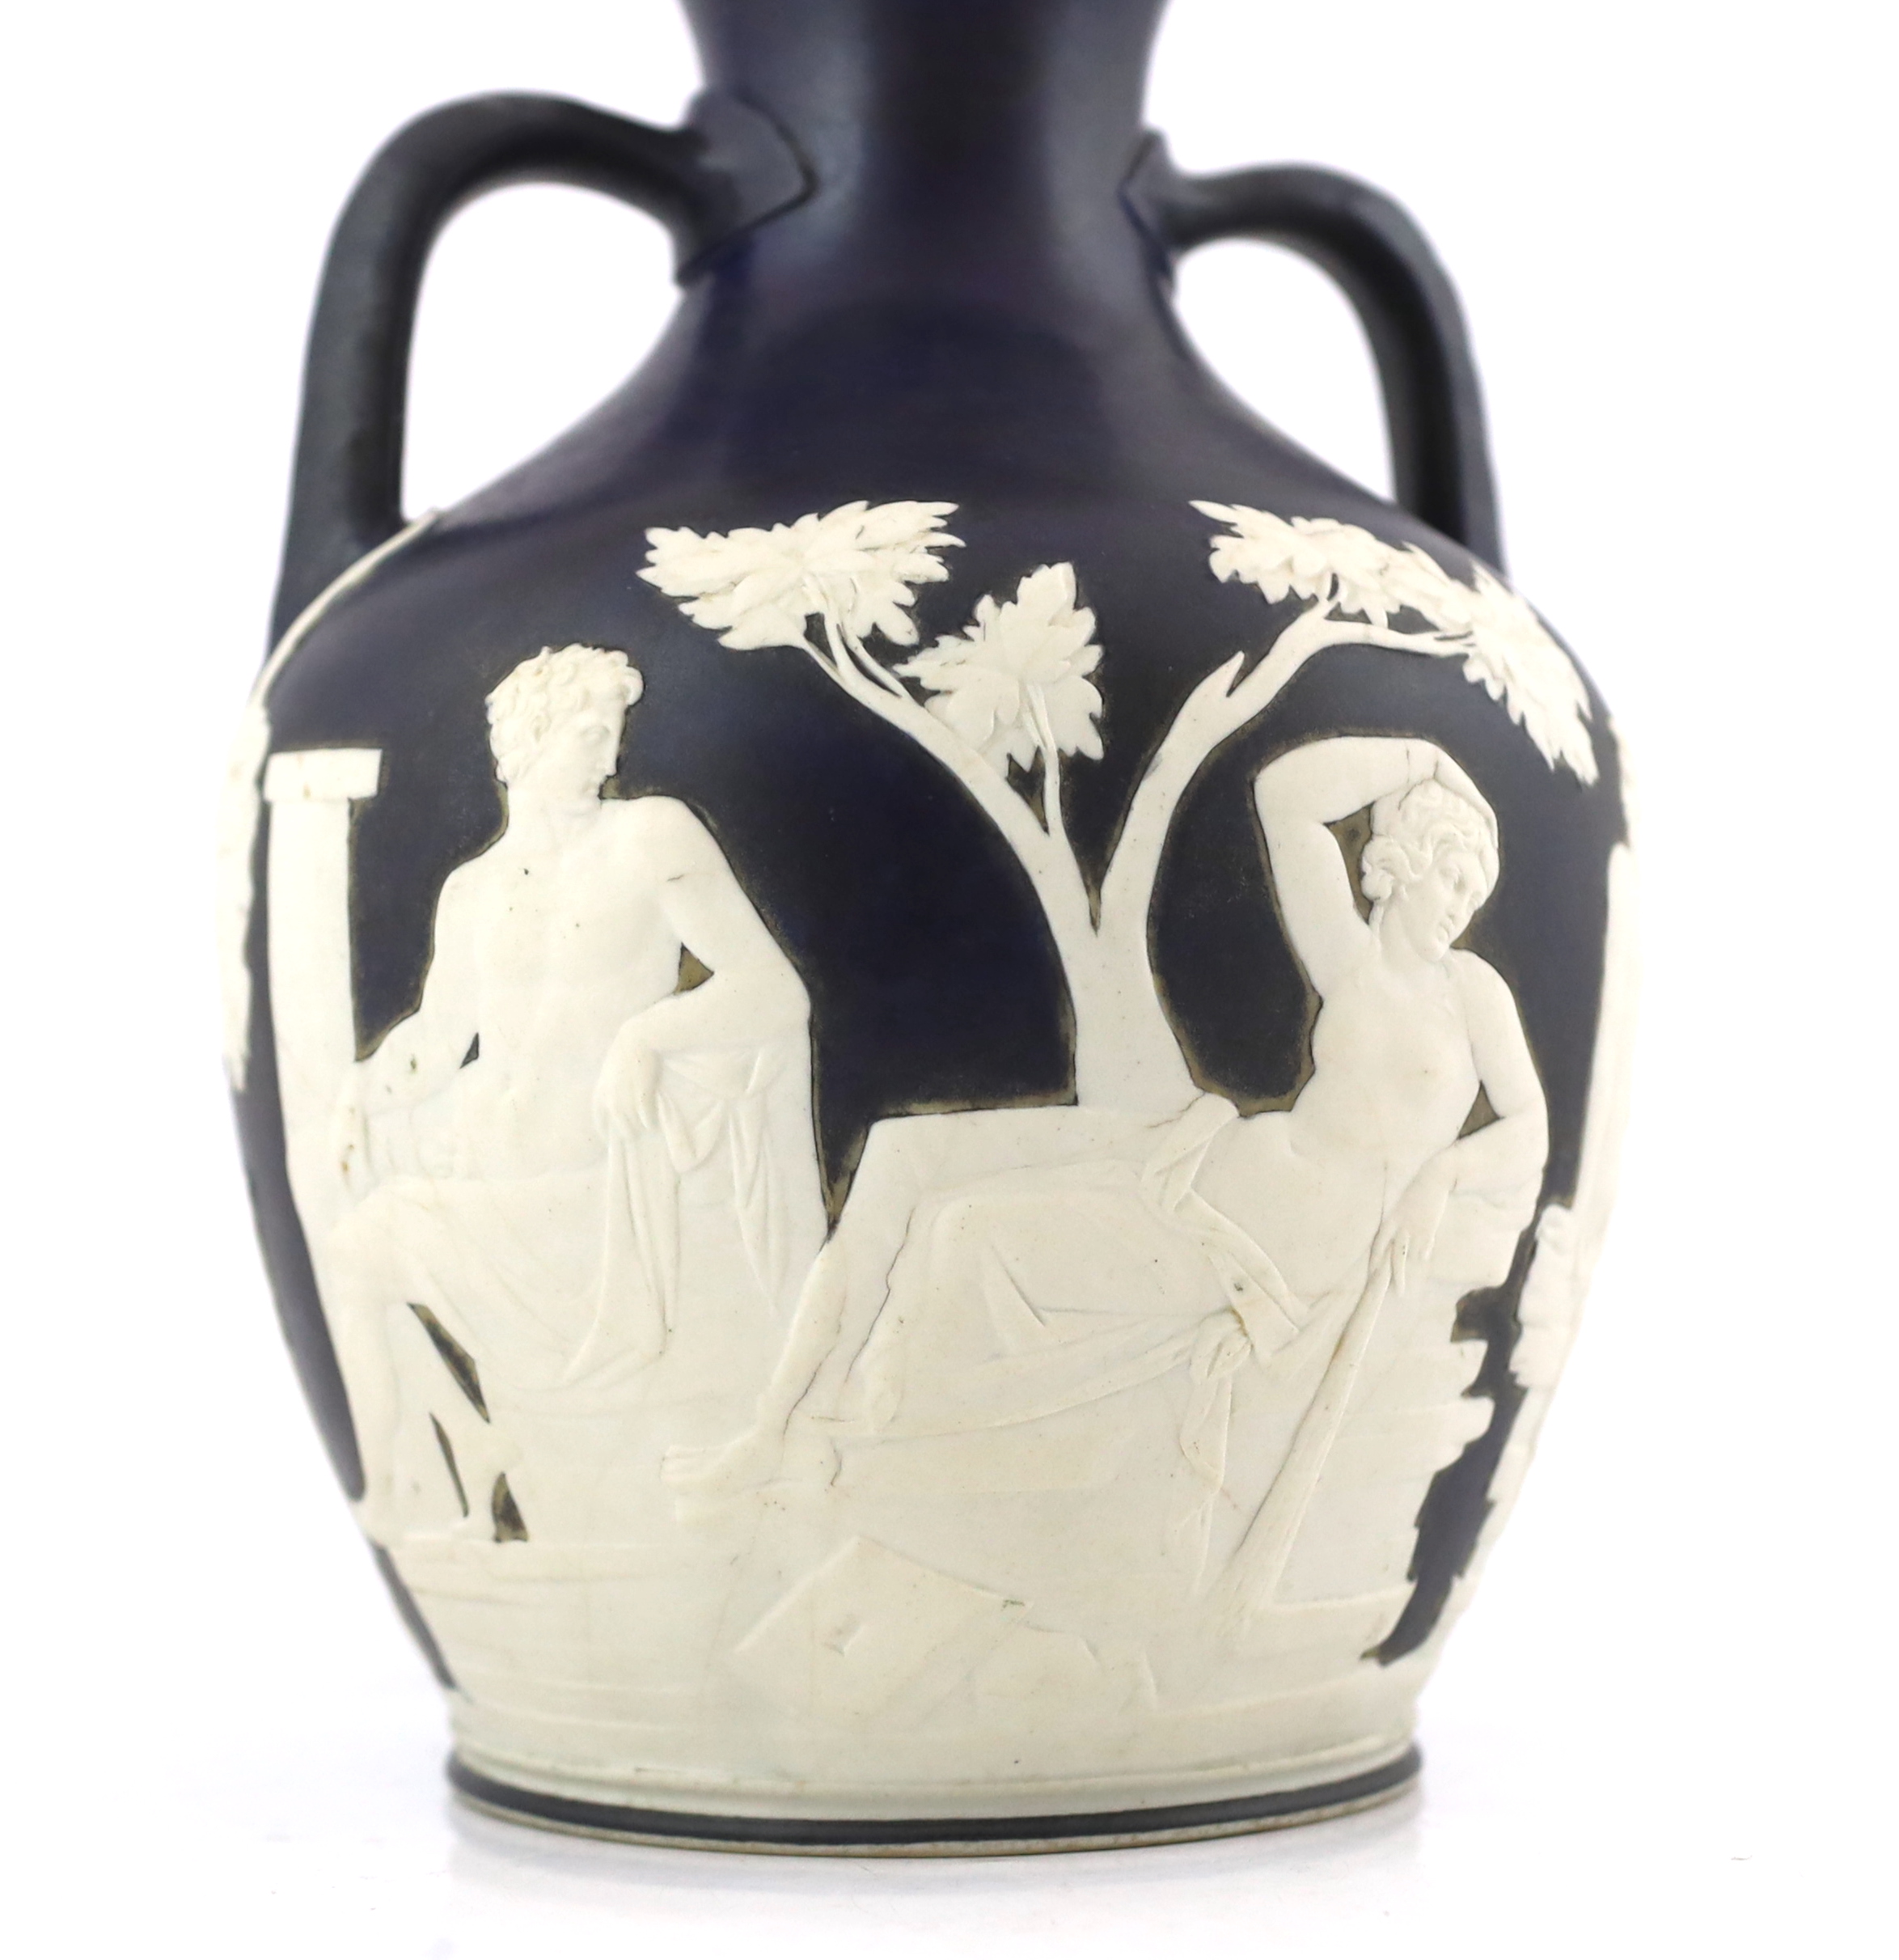 A Wedgwood dark blue glazed and white sprigged replica of the Portland vase, late 19th century